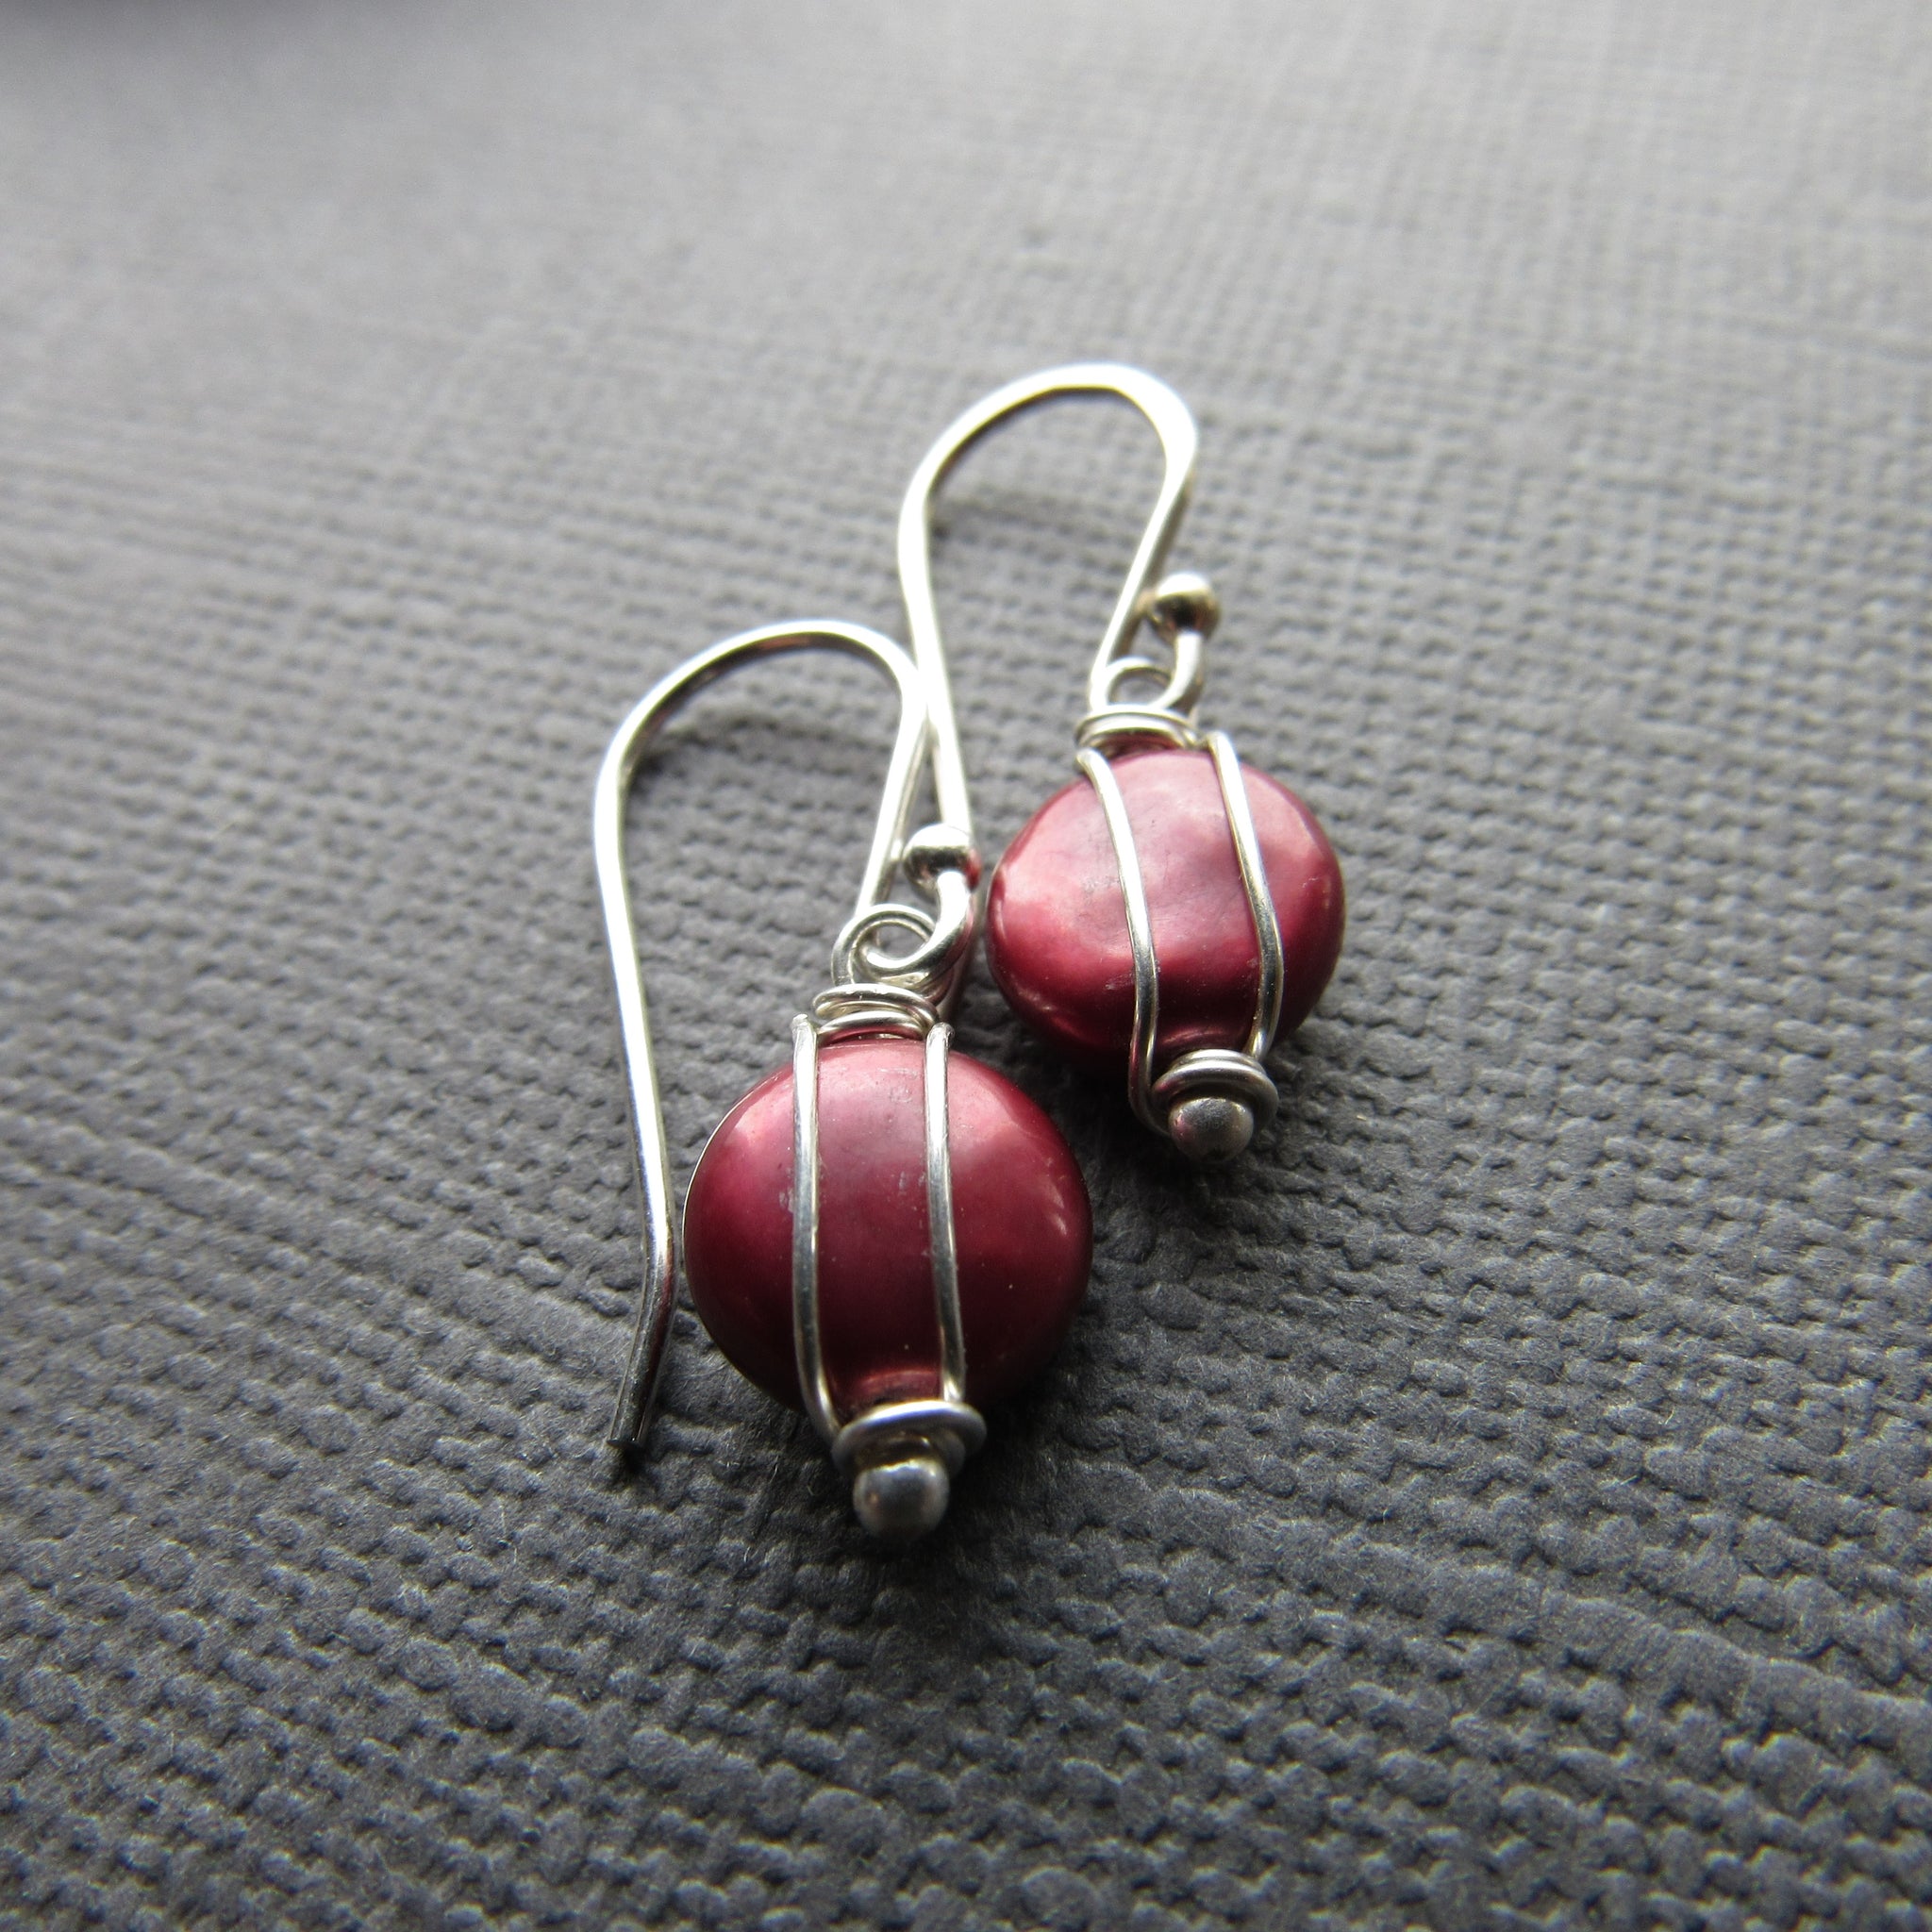 Petite Cranberry Coin Pearl Earrings